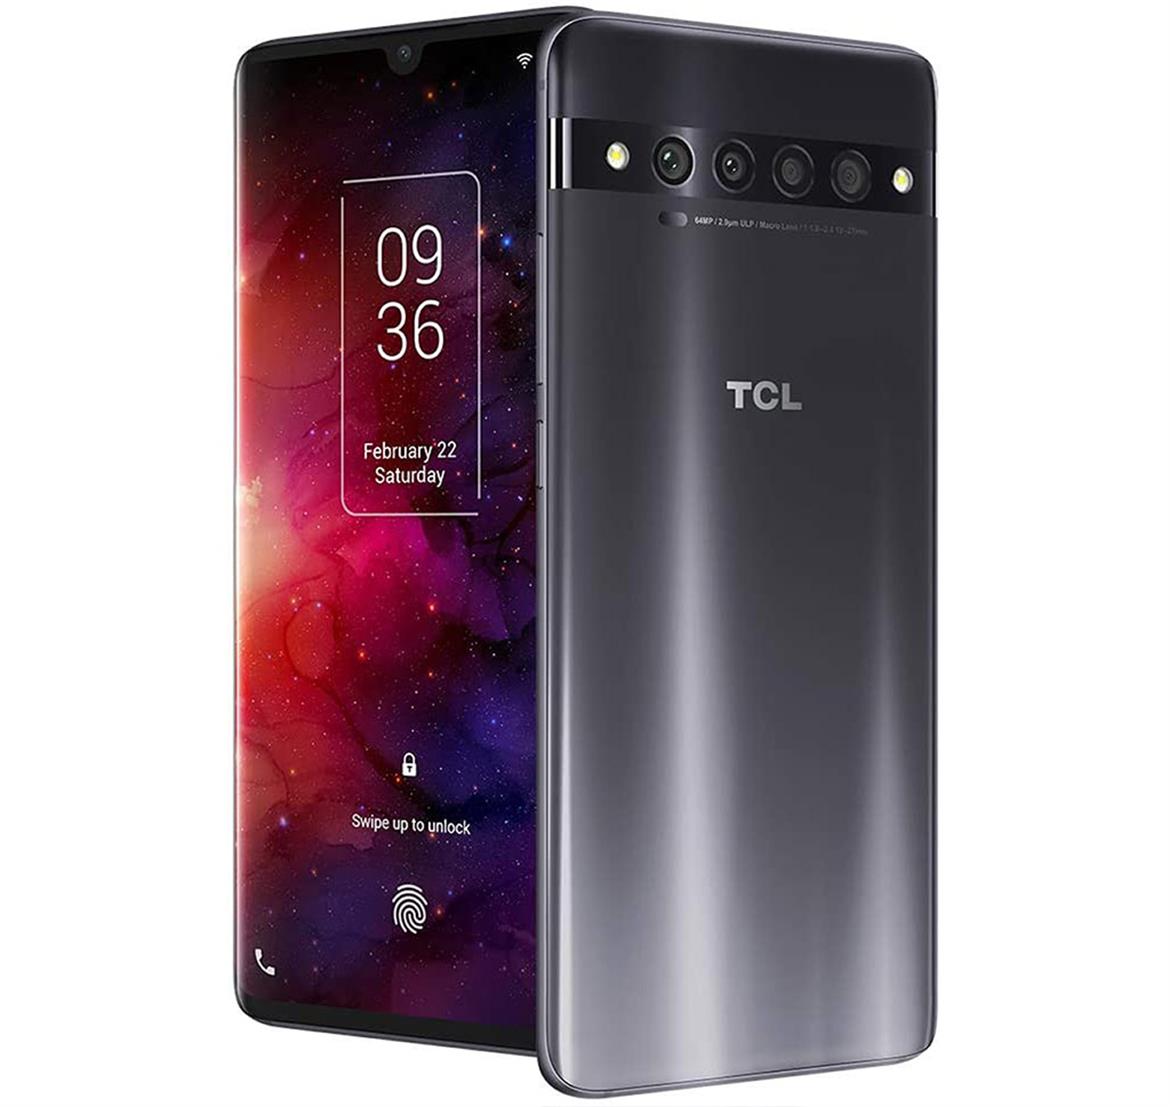 Beat The Heat With HotHardware's TCL 10 Pro Giveaway!